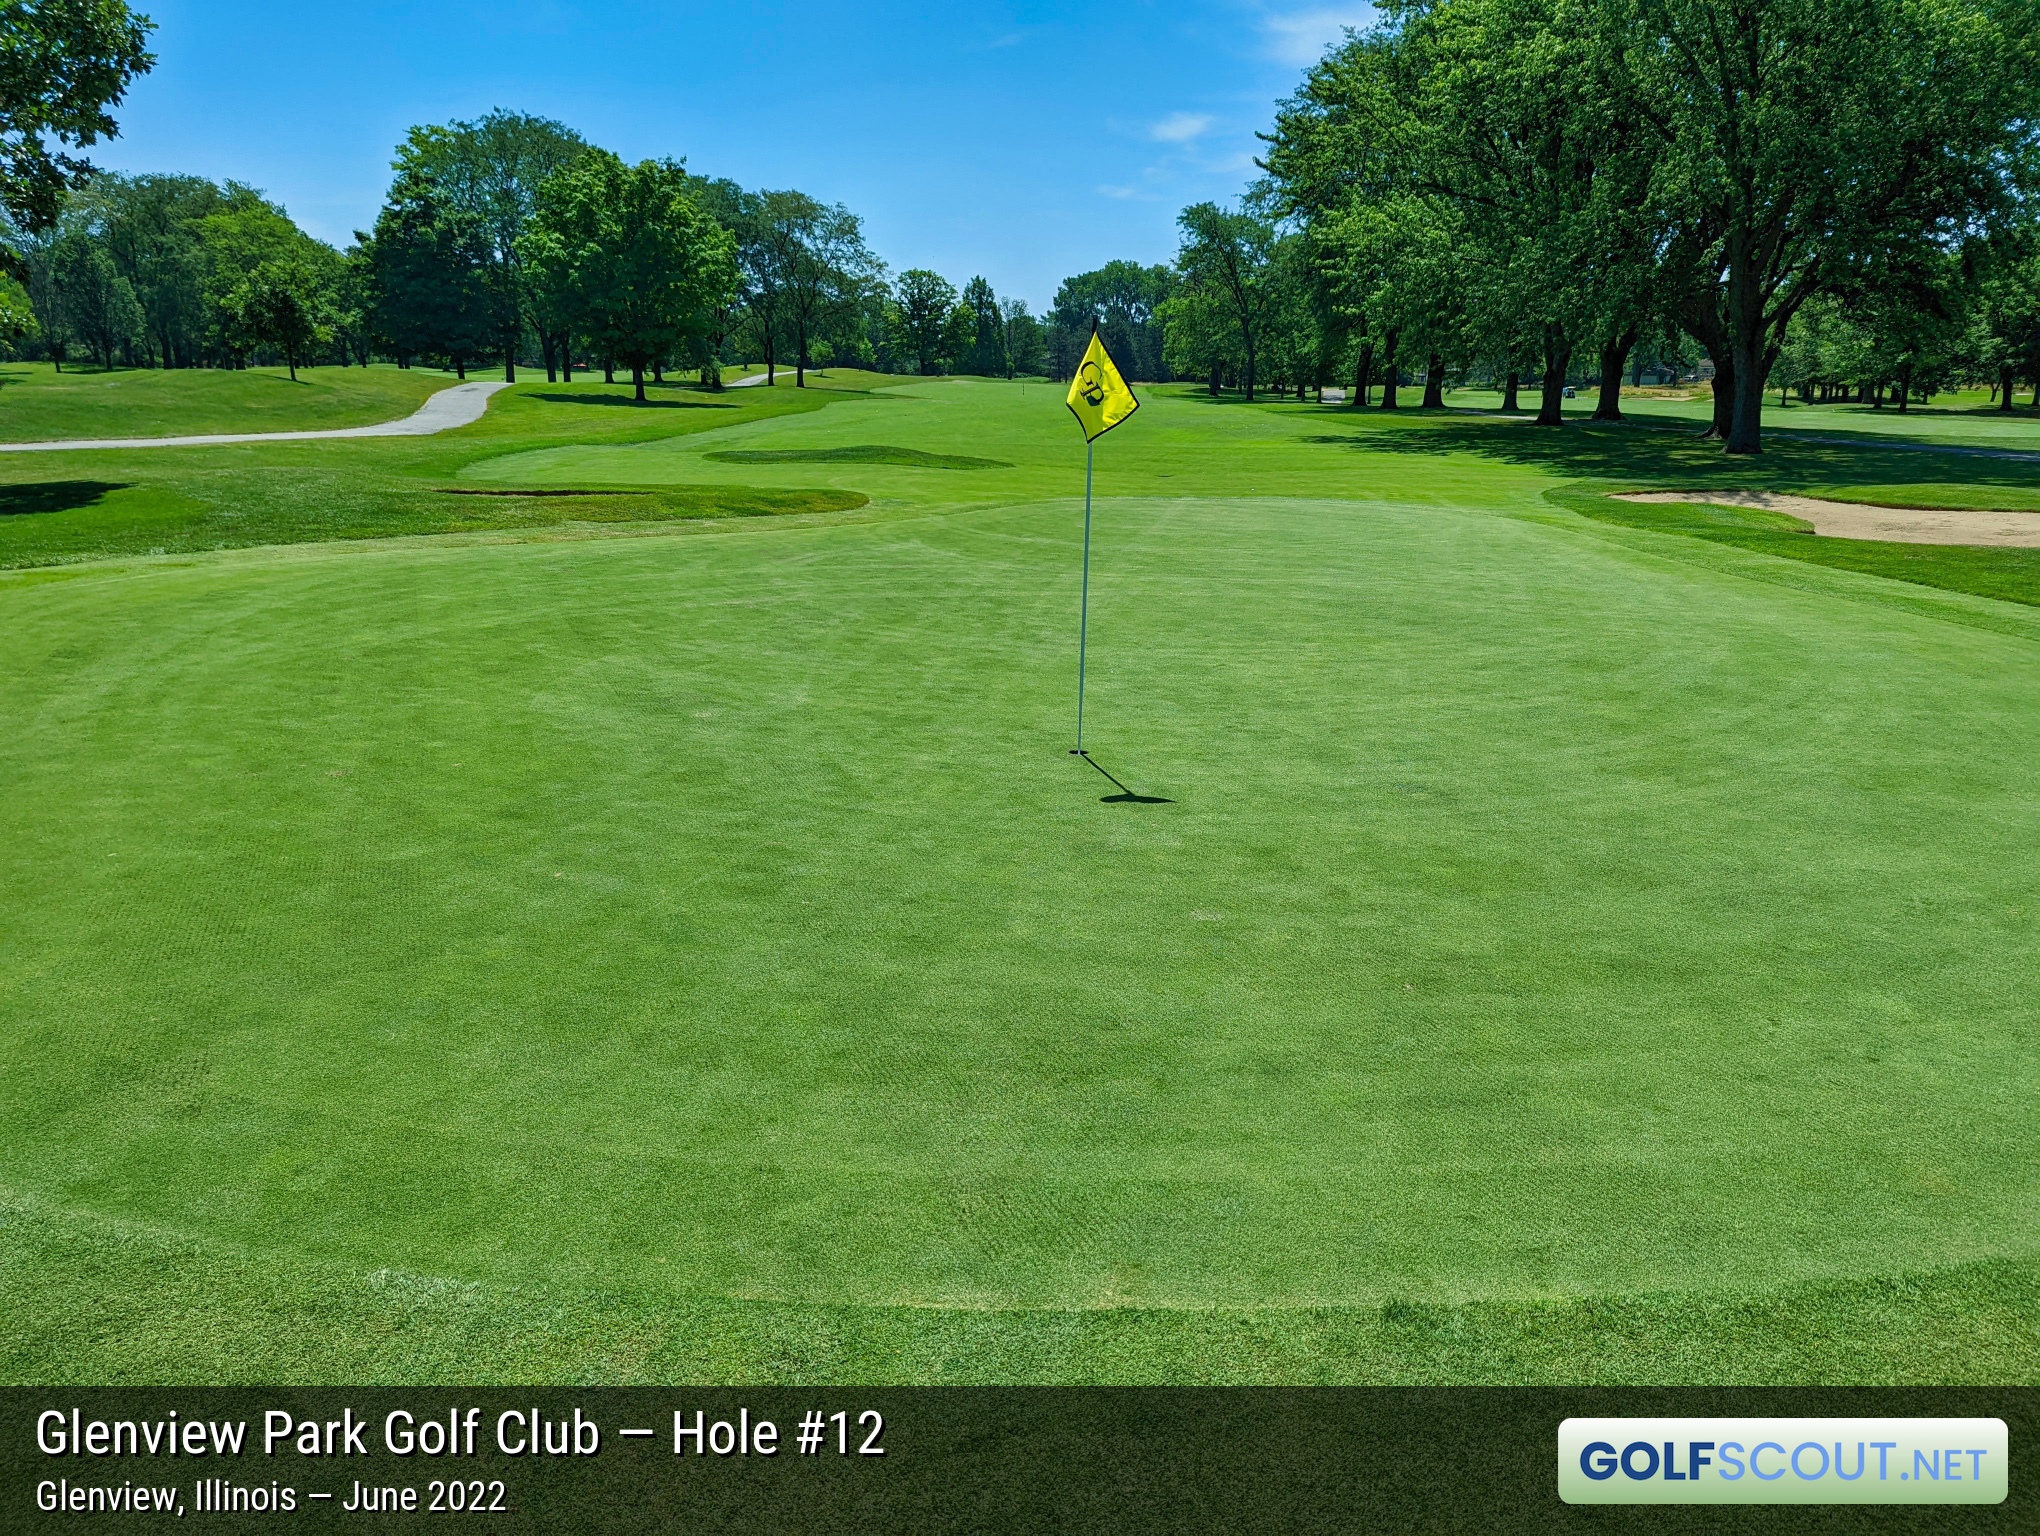 Photo of hole #12 at Glenview Park Golf Club in Glenview, Illinois. 